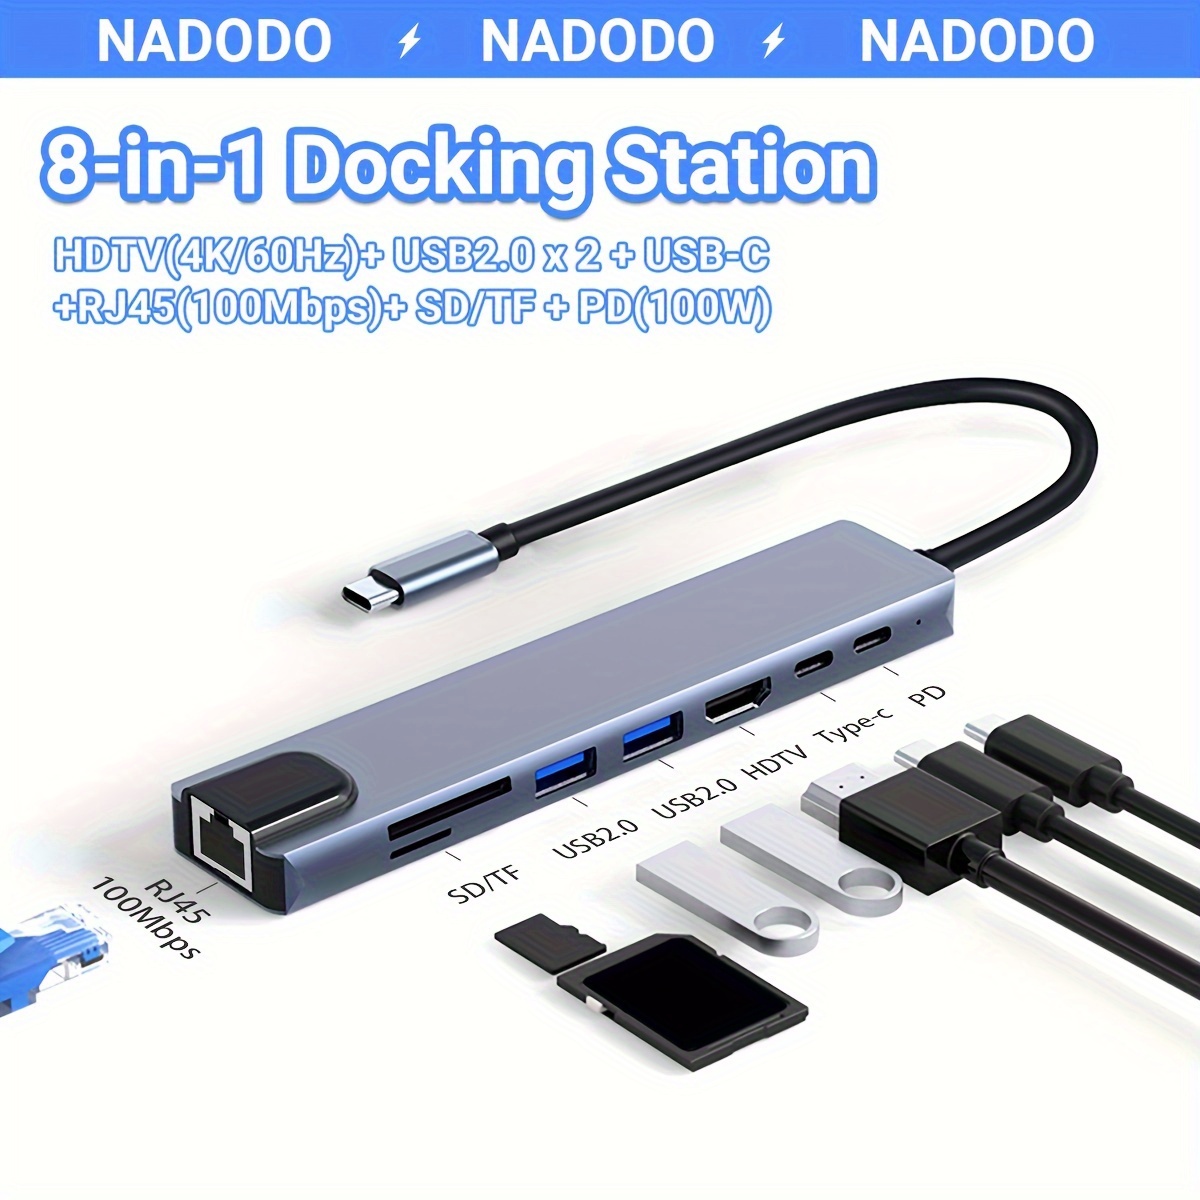 PULWTOP USB C Hub for Mac Mini, 5 in 1USB Hub Adapter Support M.2 NVMe SSD  Expand, Docking Station with 2 USB C 10Gbps, SD/TF Card Reader, M.2 SSD